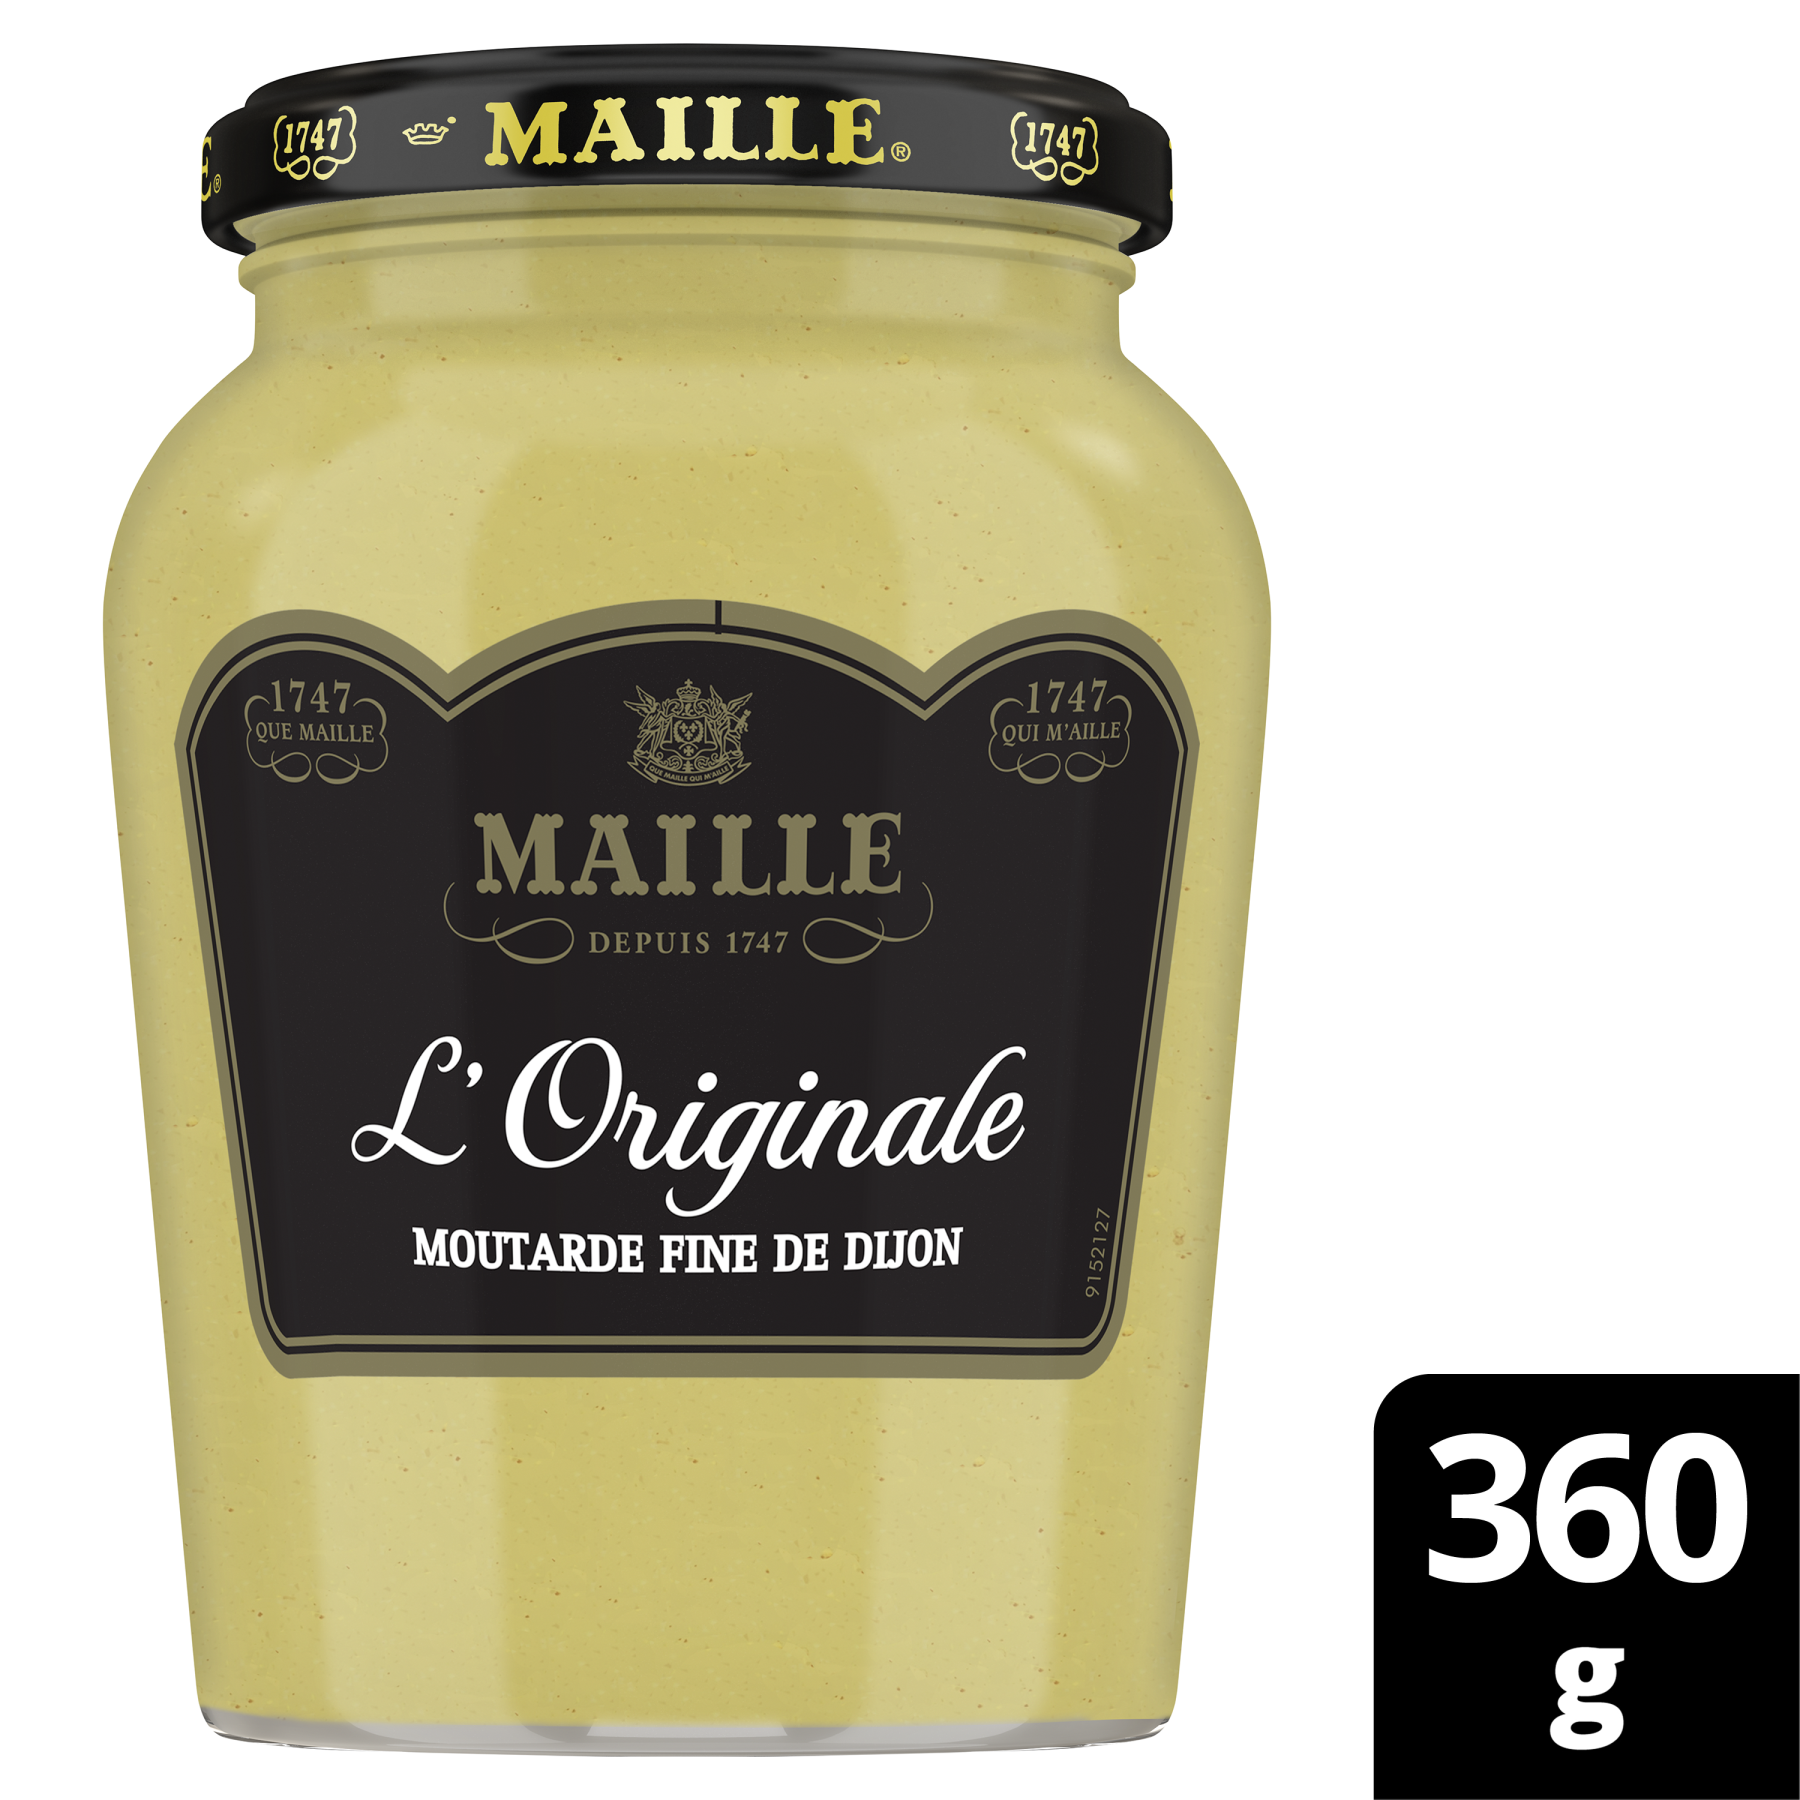 MAILLE : Moutarde fin gourmet - chronodrive